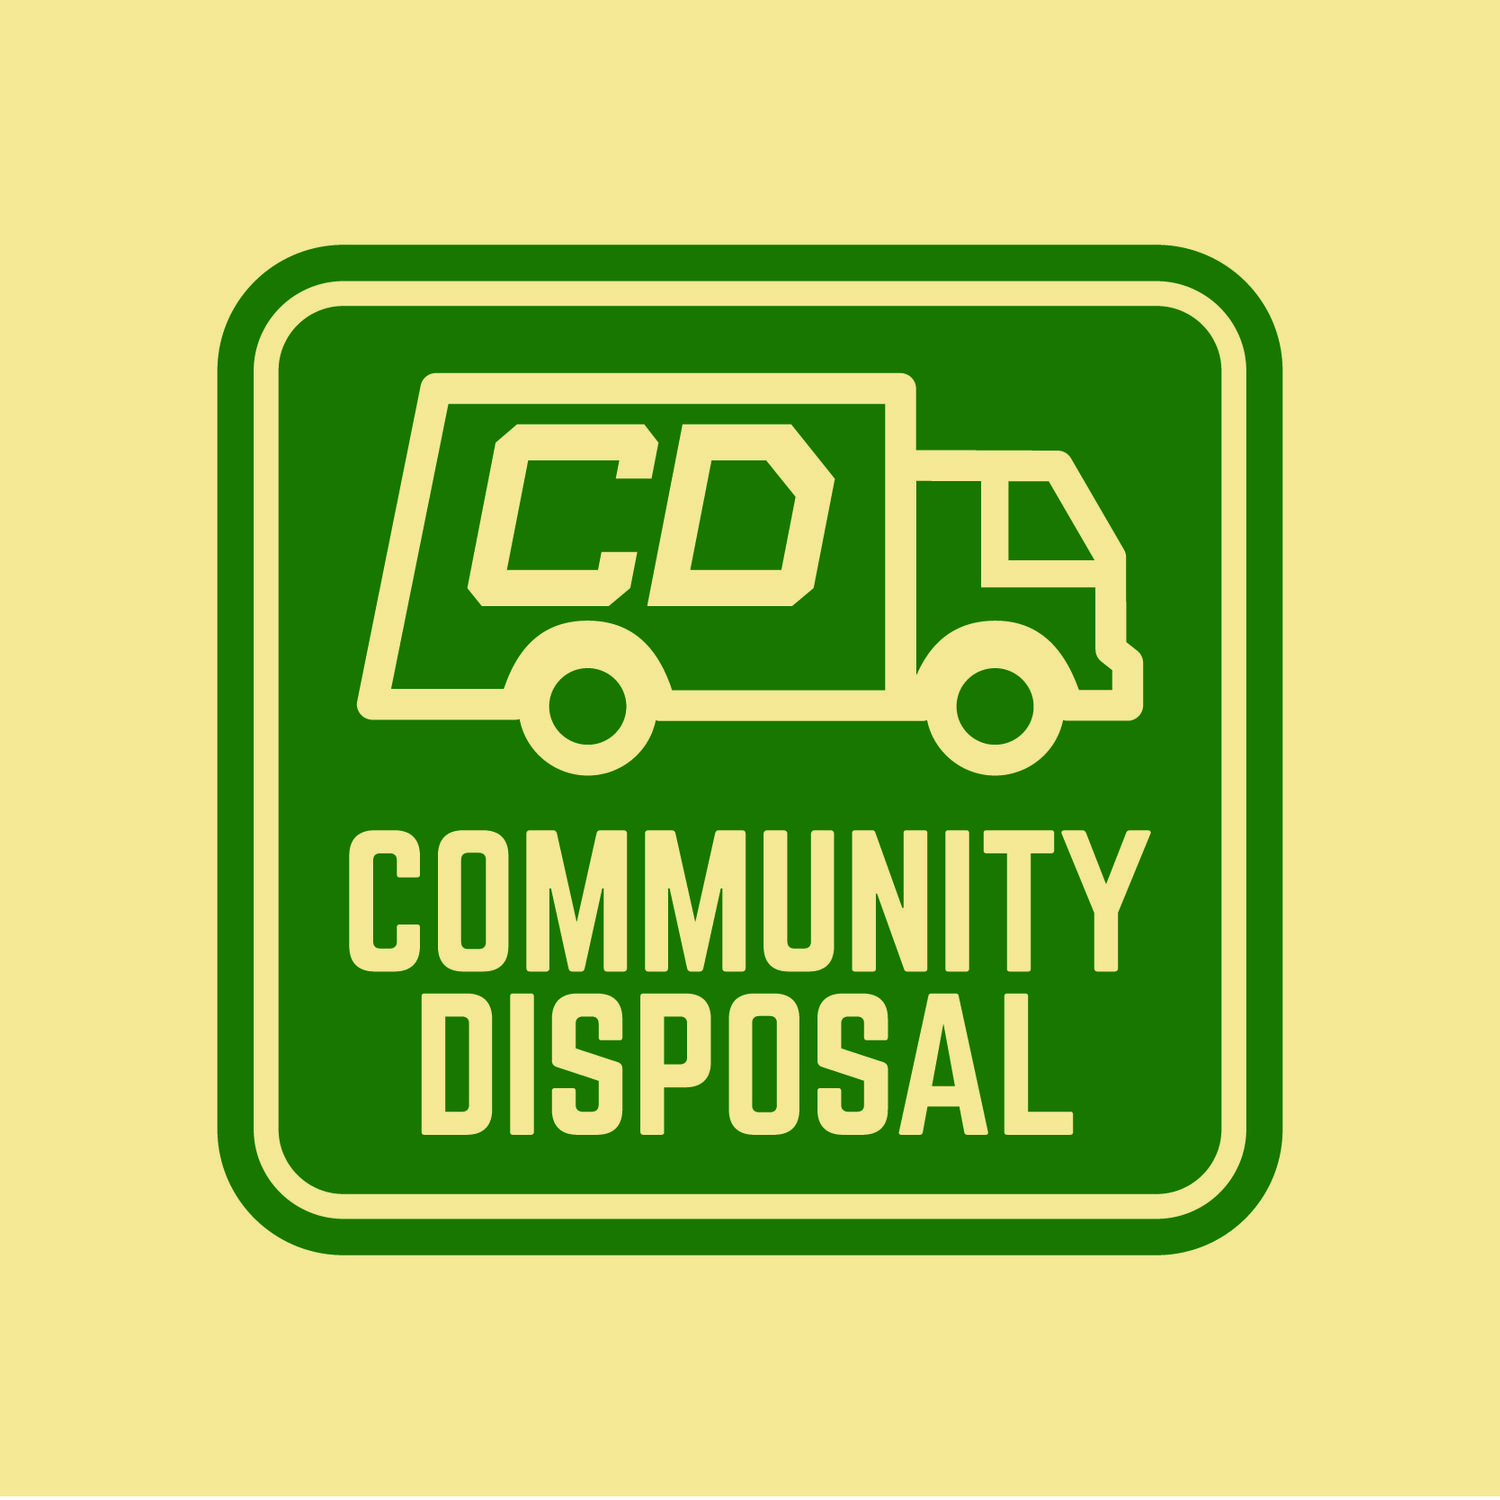 Community Disposal Dumpsters, Compactors, and commercial and business waste services local Jacksonville, FL 